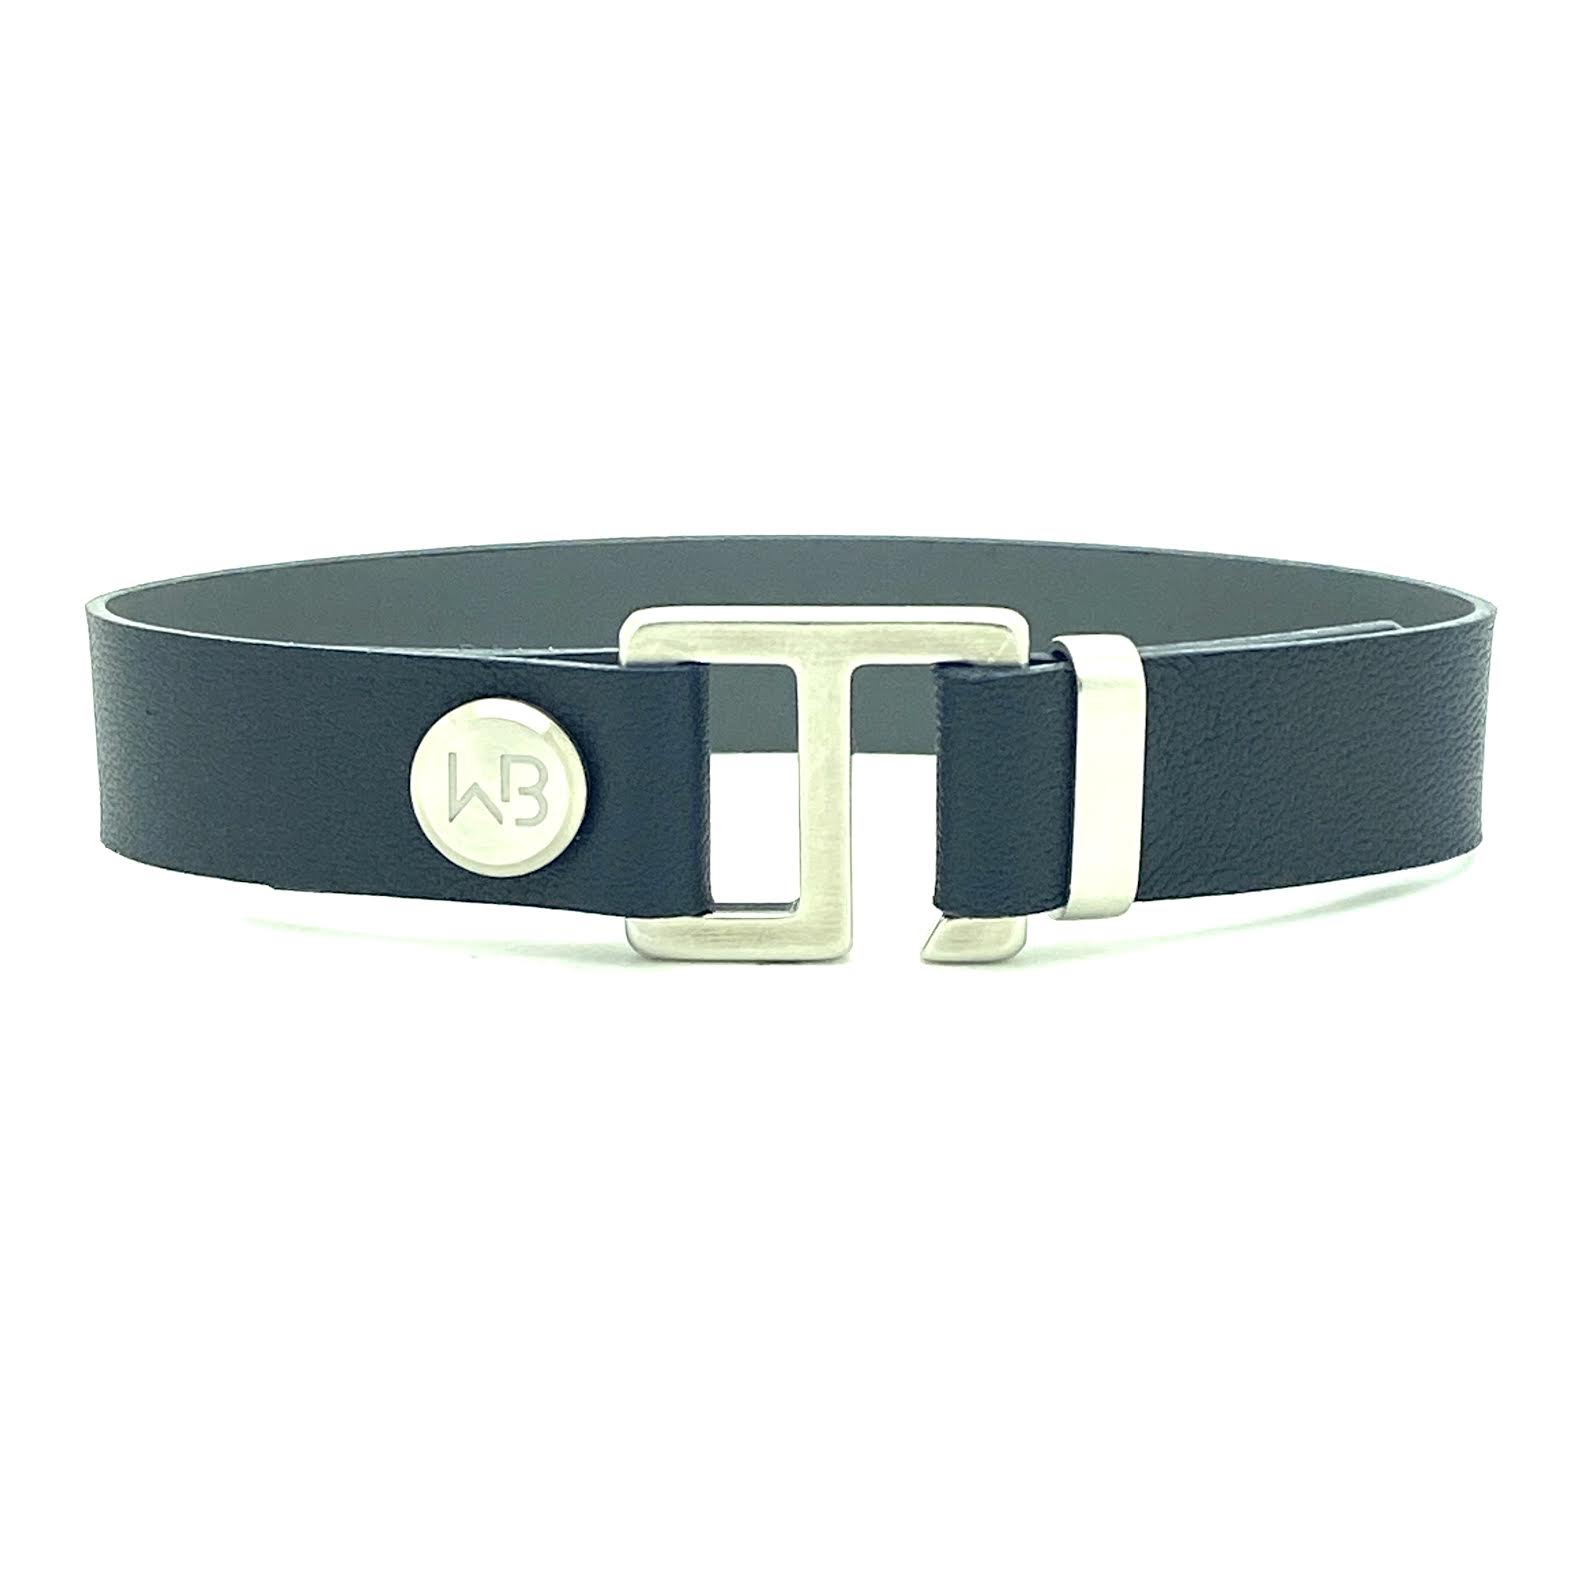 Our striking navy blue/charcoal grey leather cuff bracelet is paired perfectly with your choice of our artisan designed brushed hardware. Choices include rose gold, yellow gold, stainless steel or black ceramic. This adjustable size bracelet is a distinctive piece worn alone or with a WristBend stacking bracelet.  Made by WristBend